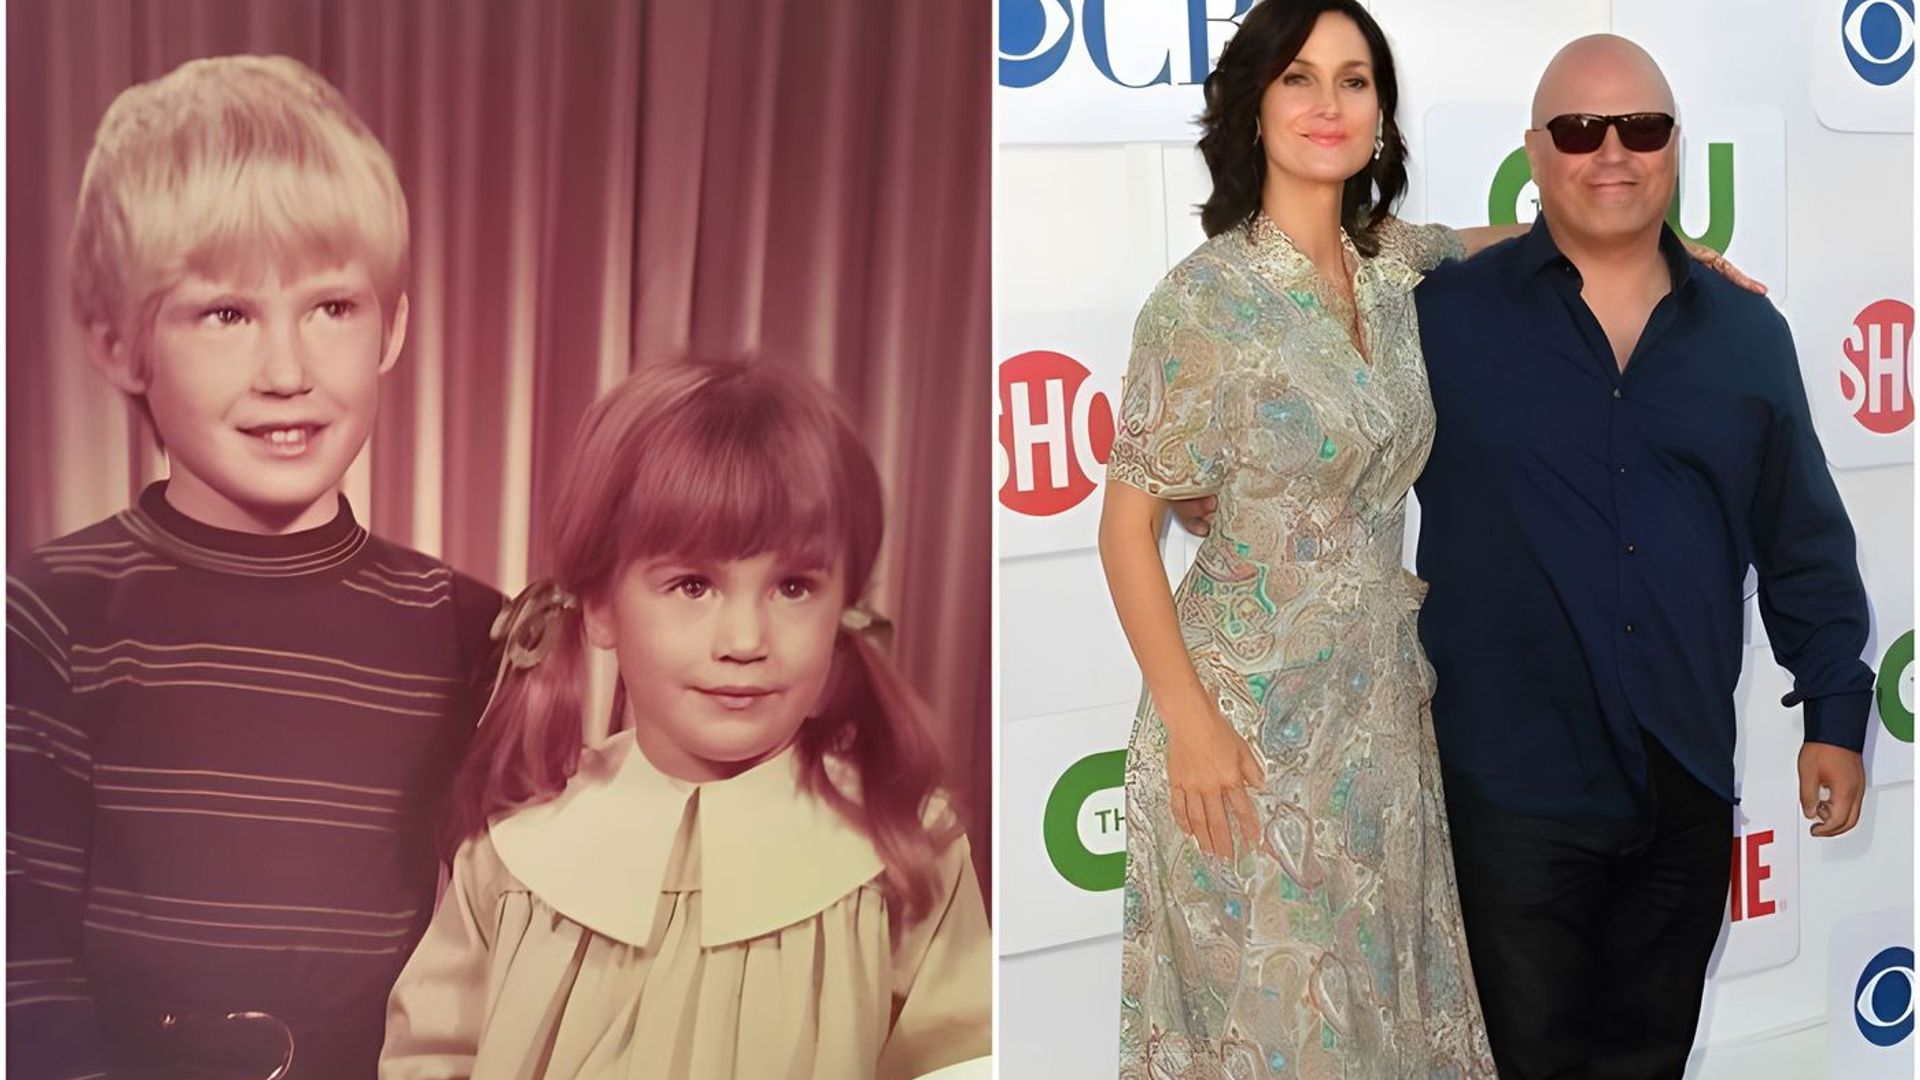 Carrie-Anne Moss and her brother Brooke as children and now